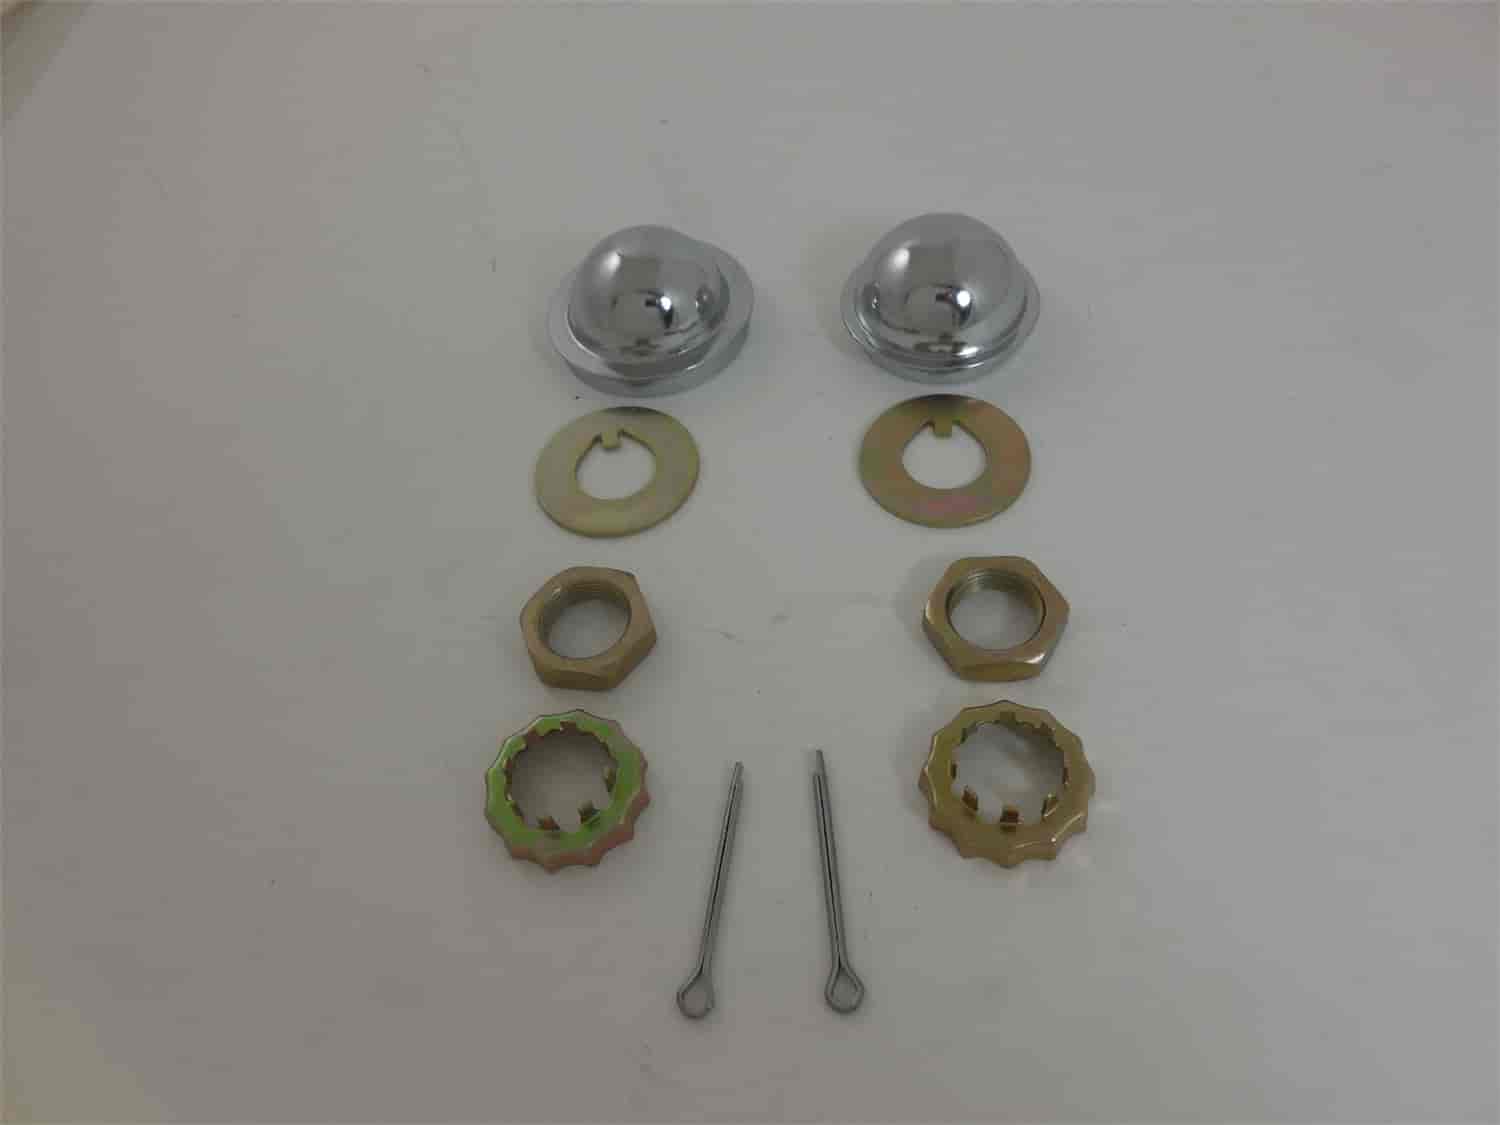 MUSTANG REPLACEMENT SPINDLE NUTS / DUST CAP KIT